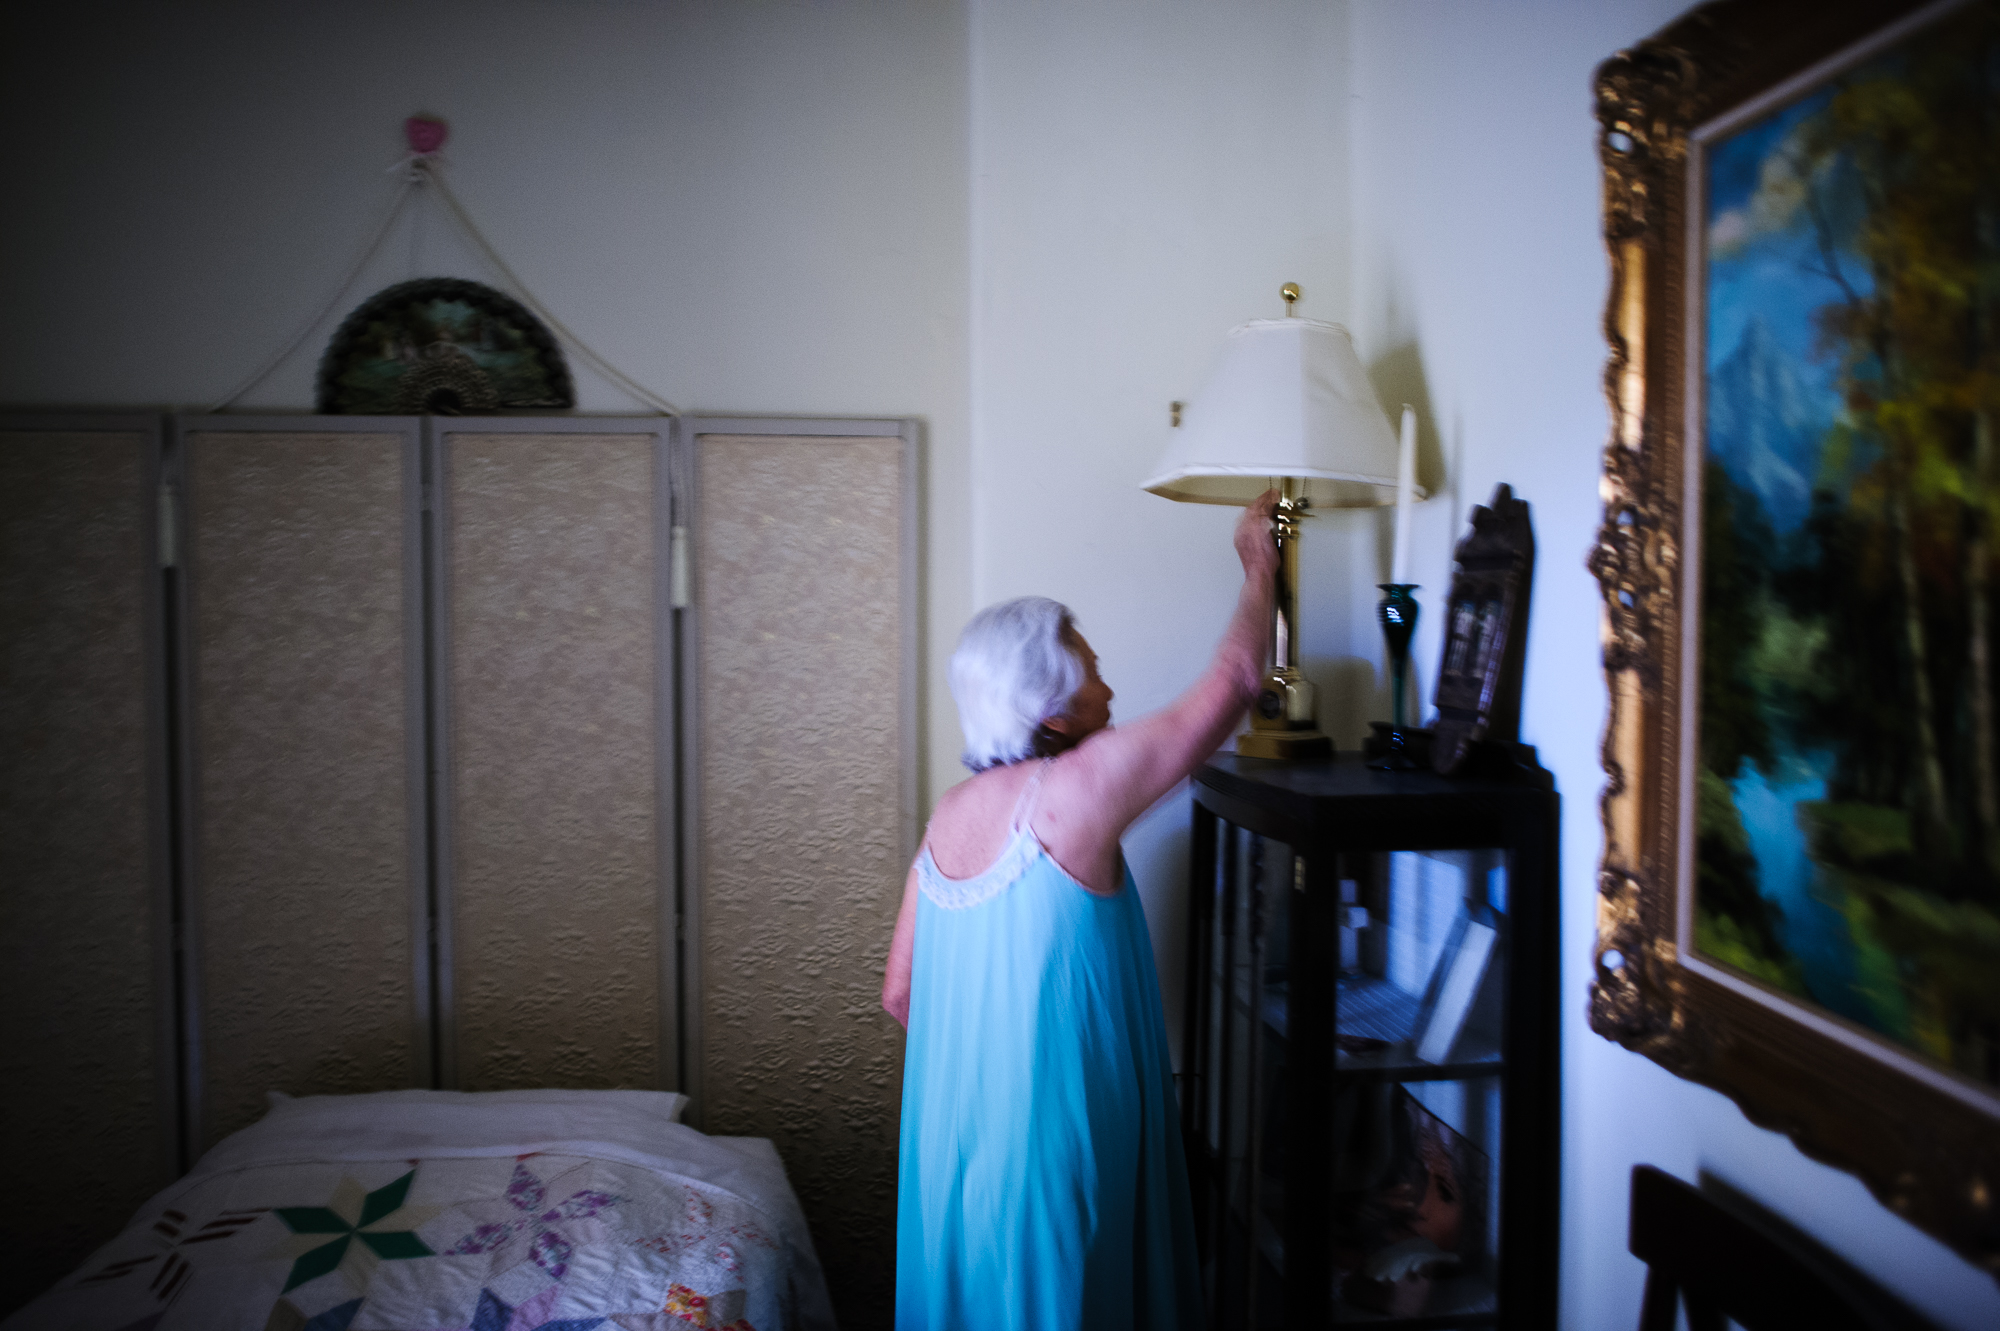  Bianca, age 84, turns on the light in her apartment at the retirement home at night, 2009.  